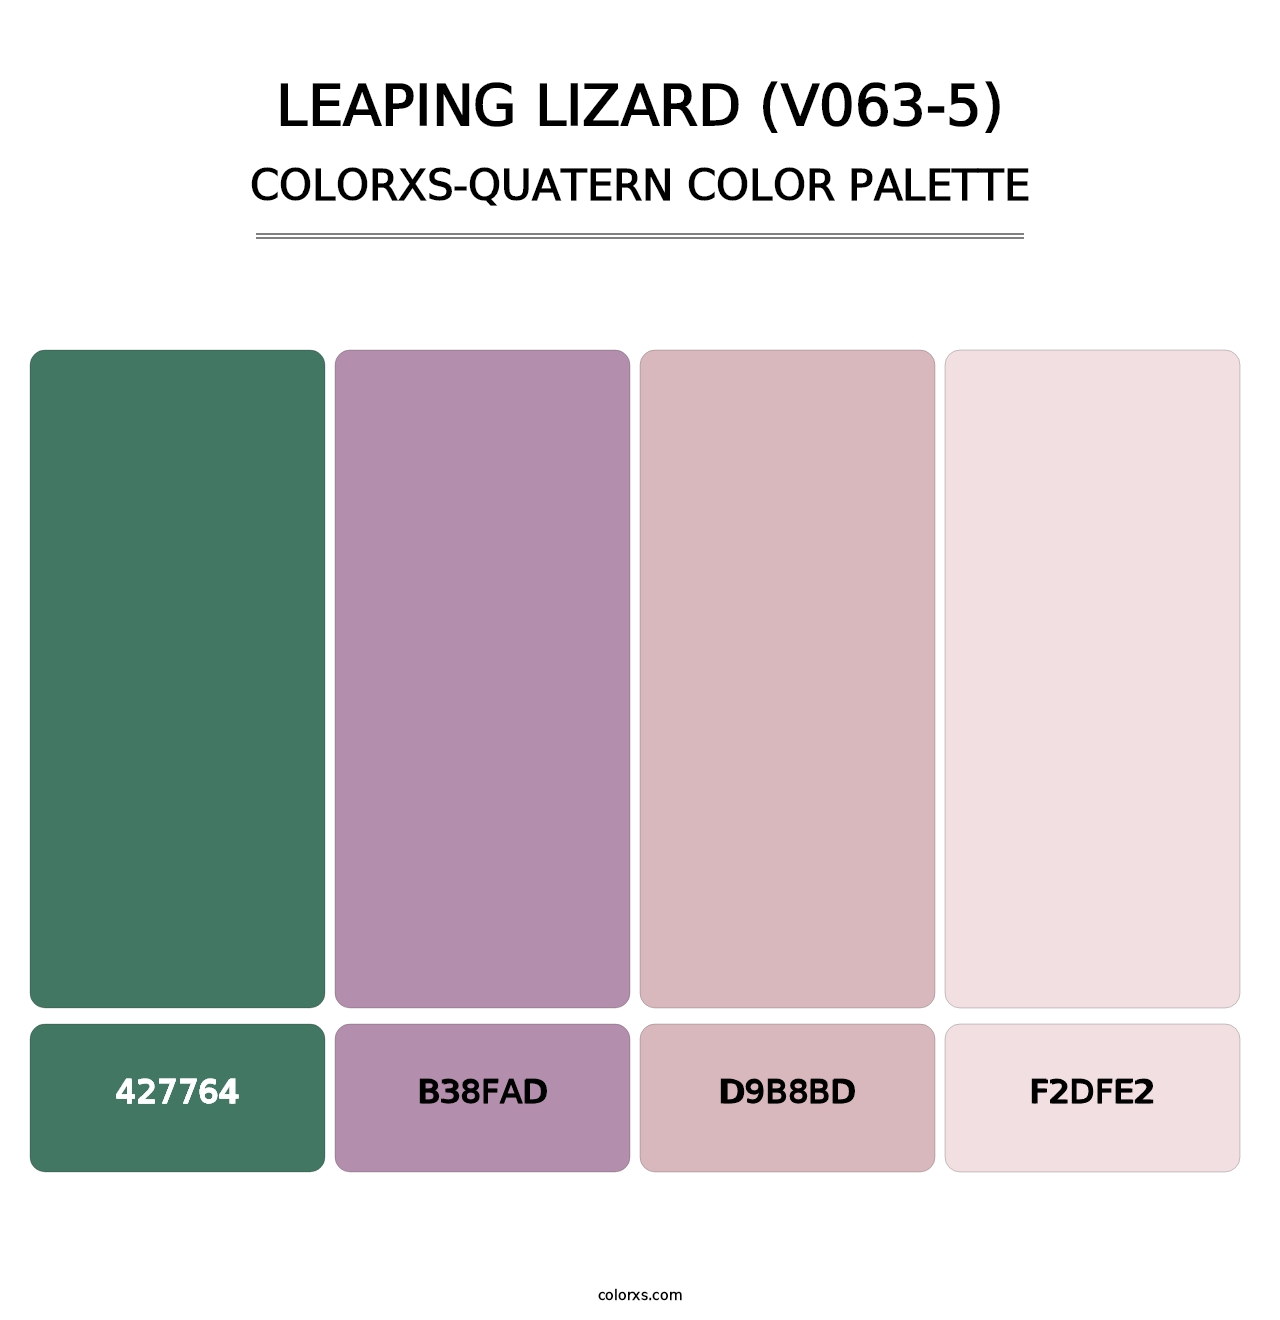 Leaping Lizard (V063-5) - Colorxs Quatern Palette